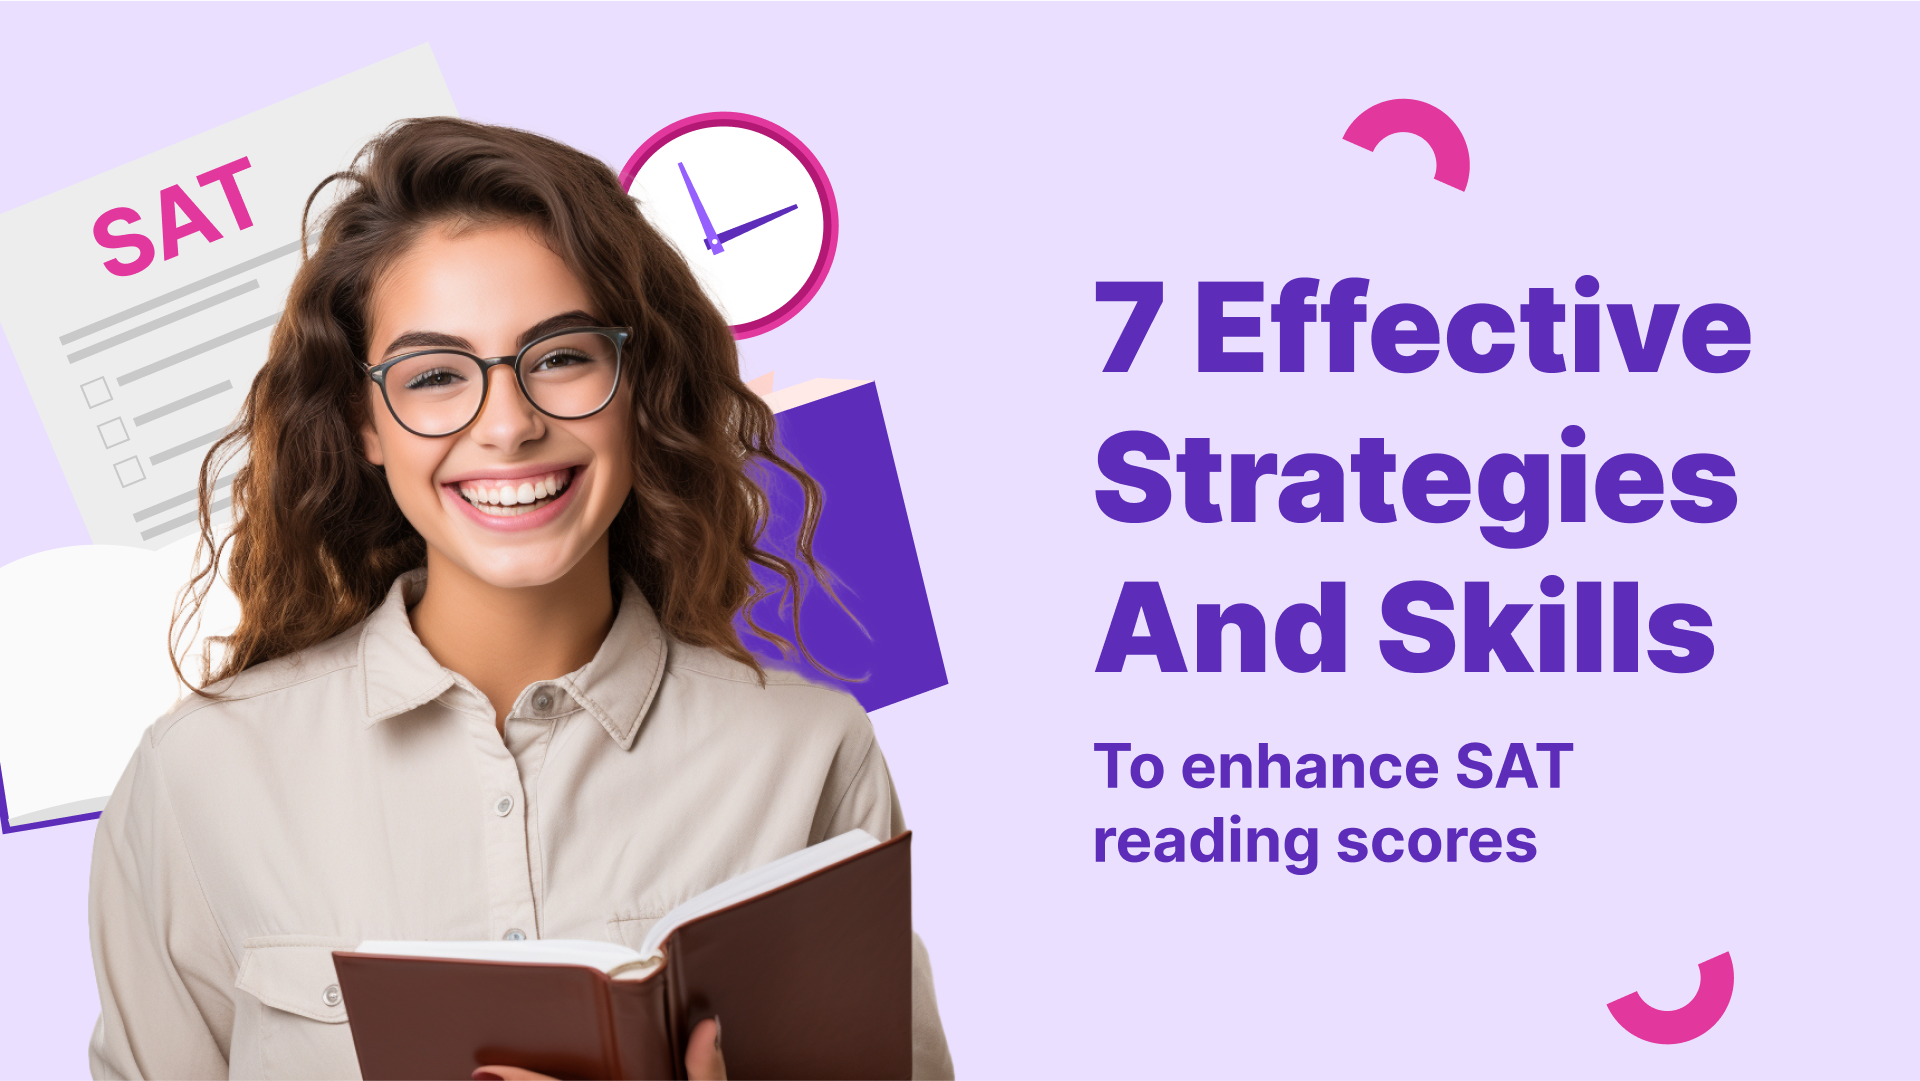 7 Effective Strategies and Skills to Enhance SAT Reading Scores